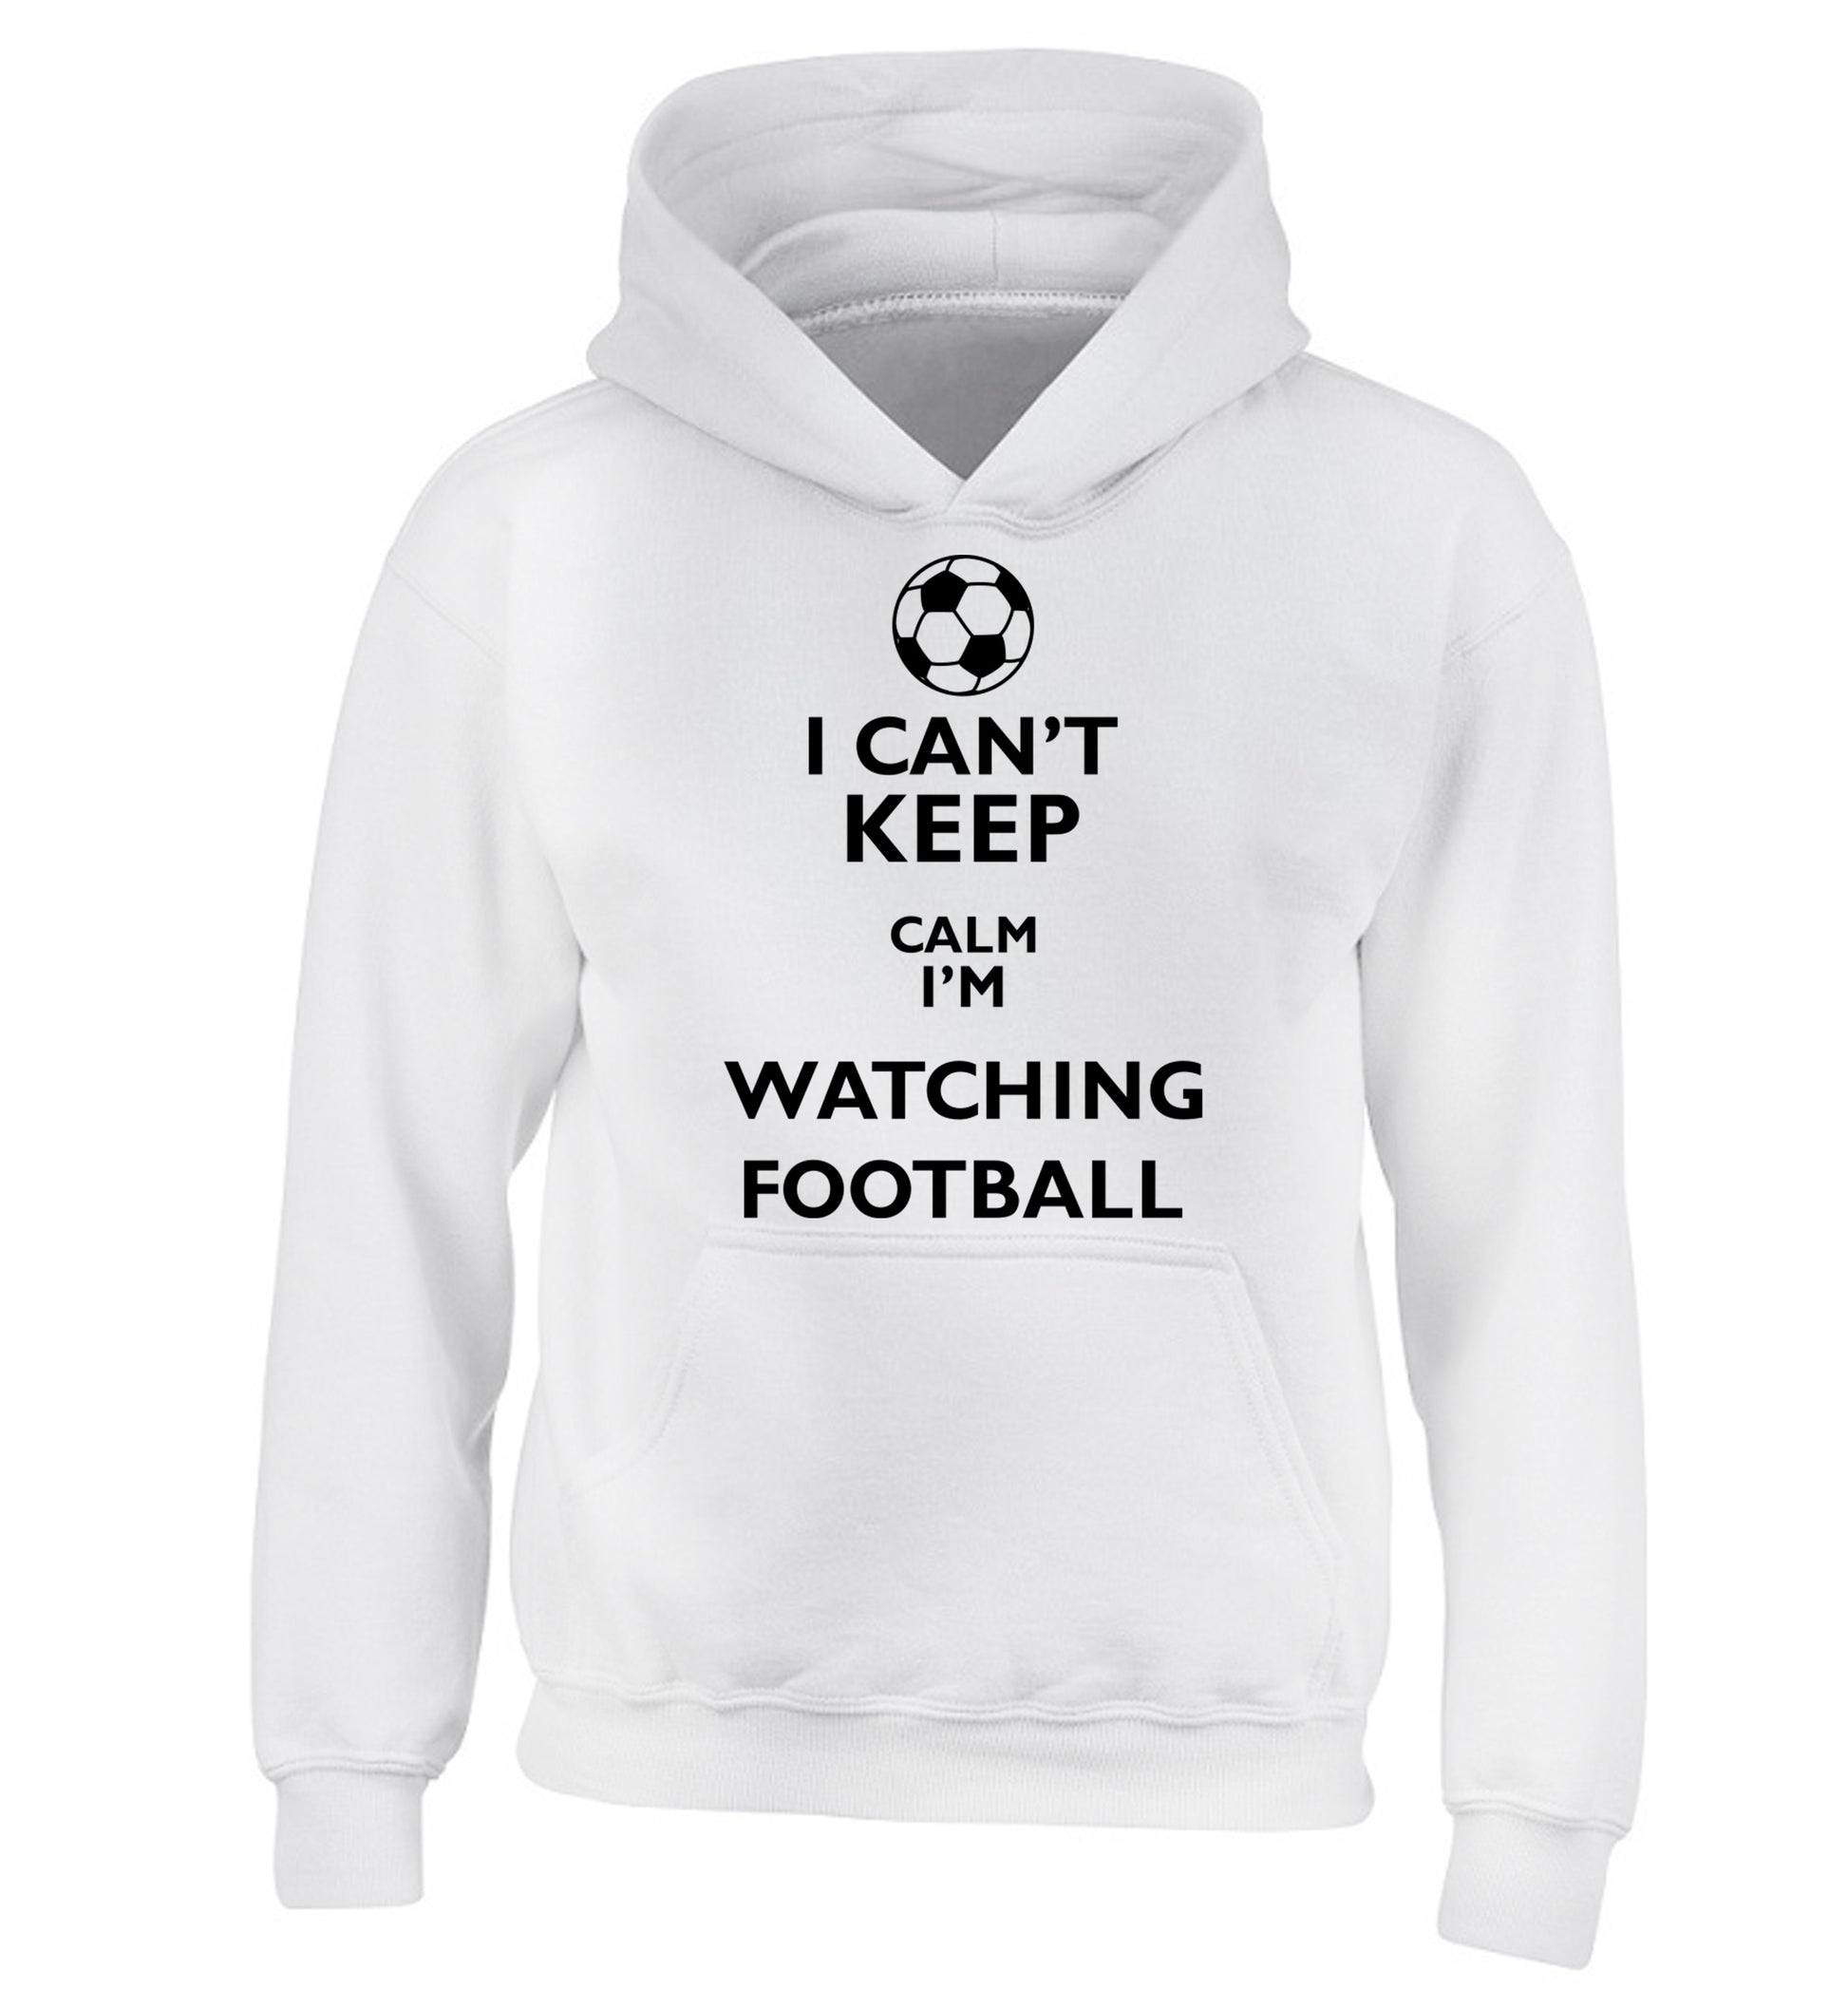 I can't keep calm I'm watching the football children's white hoodie 12-14 Years